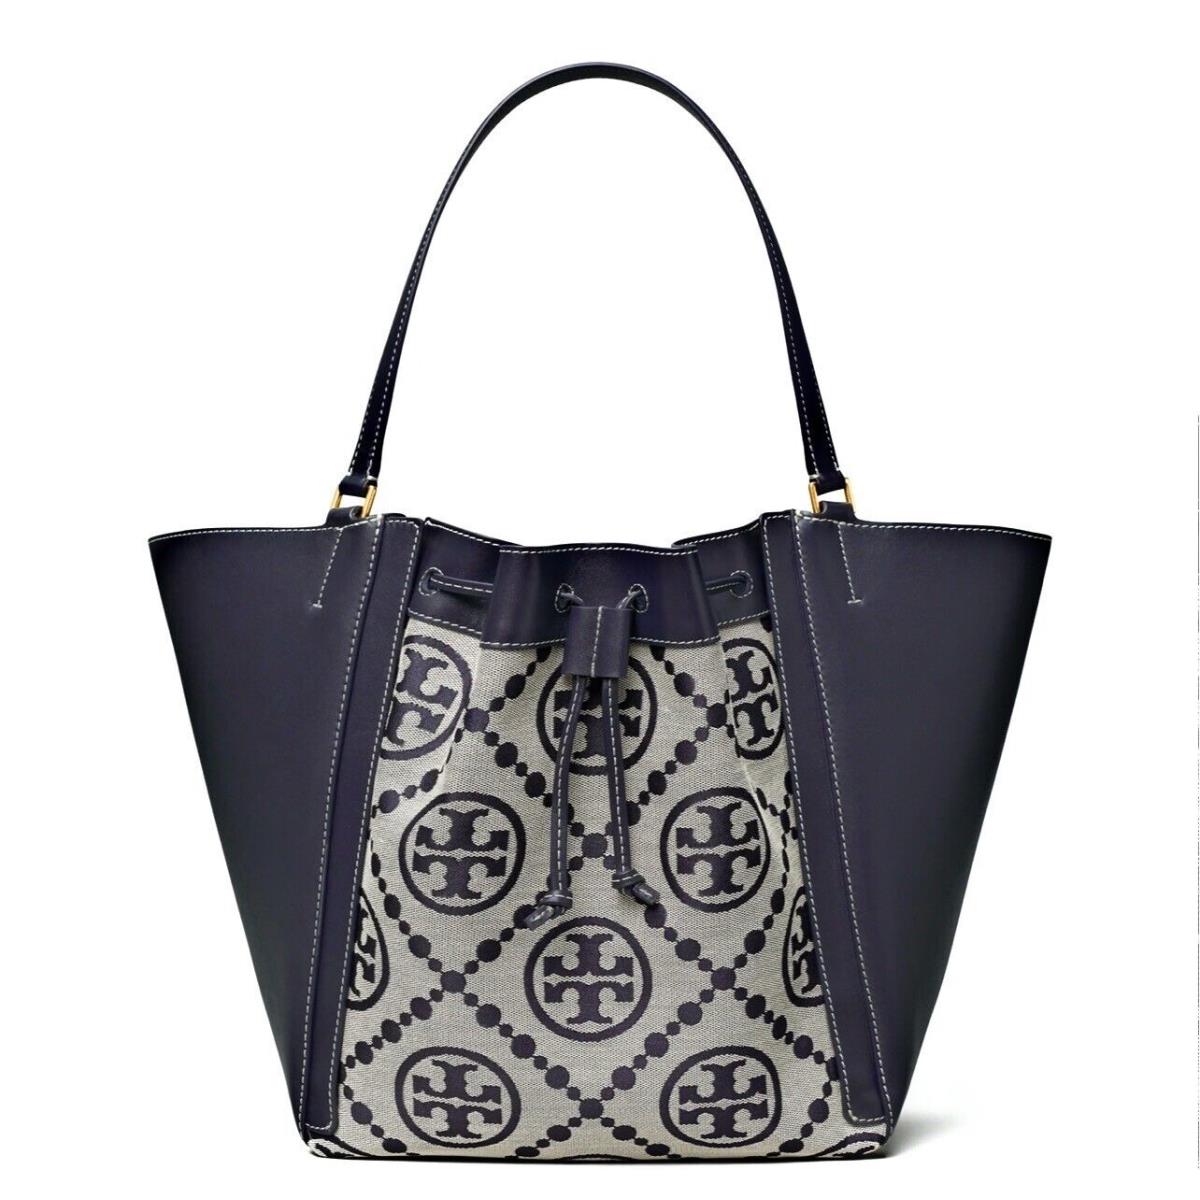 Tory Burch T Monogram Mcgraw Dragonfly Tote